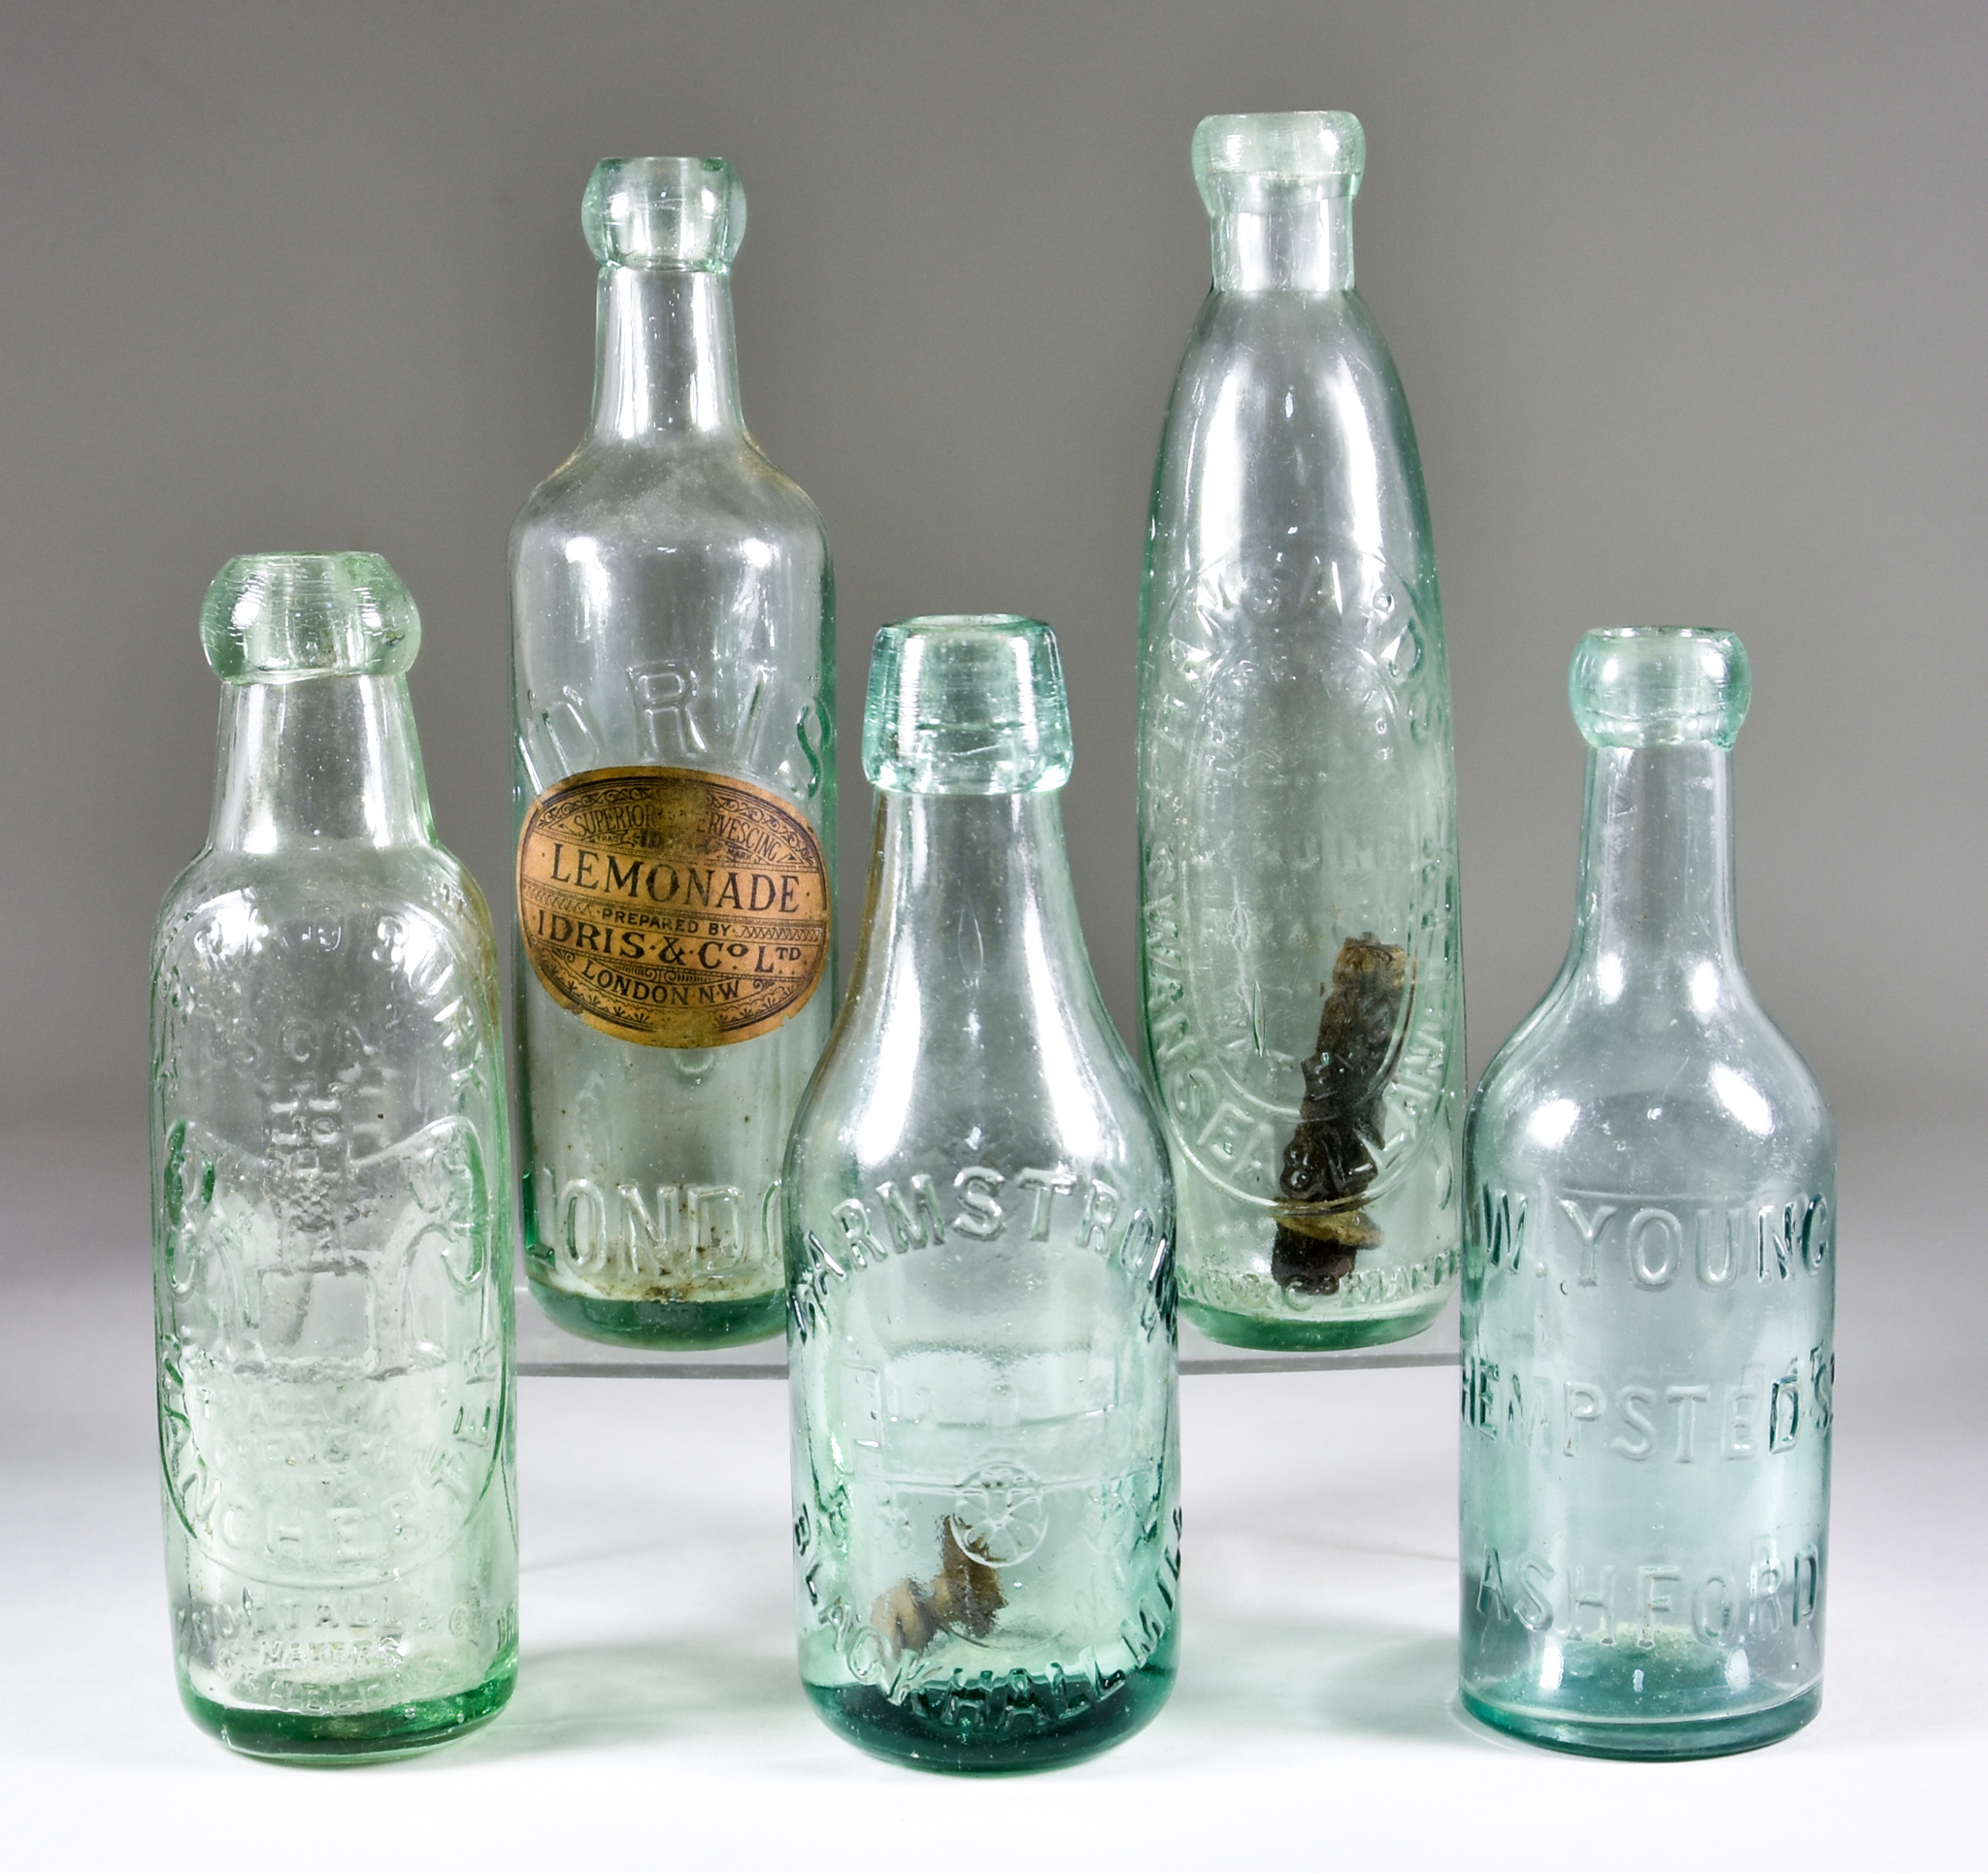 A Collection of English Glass Soda Water, Lemonade and Ginger Beer Bottles, of primarily pale